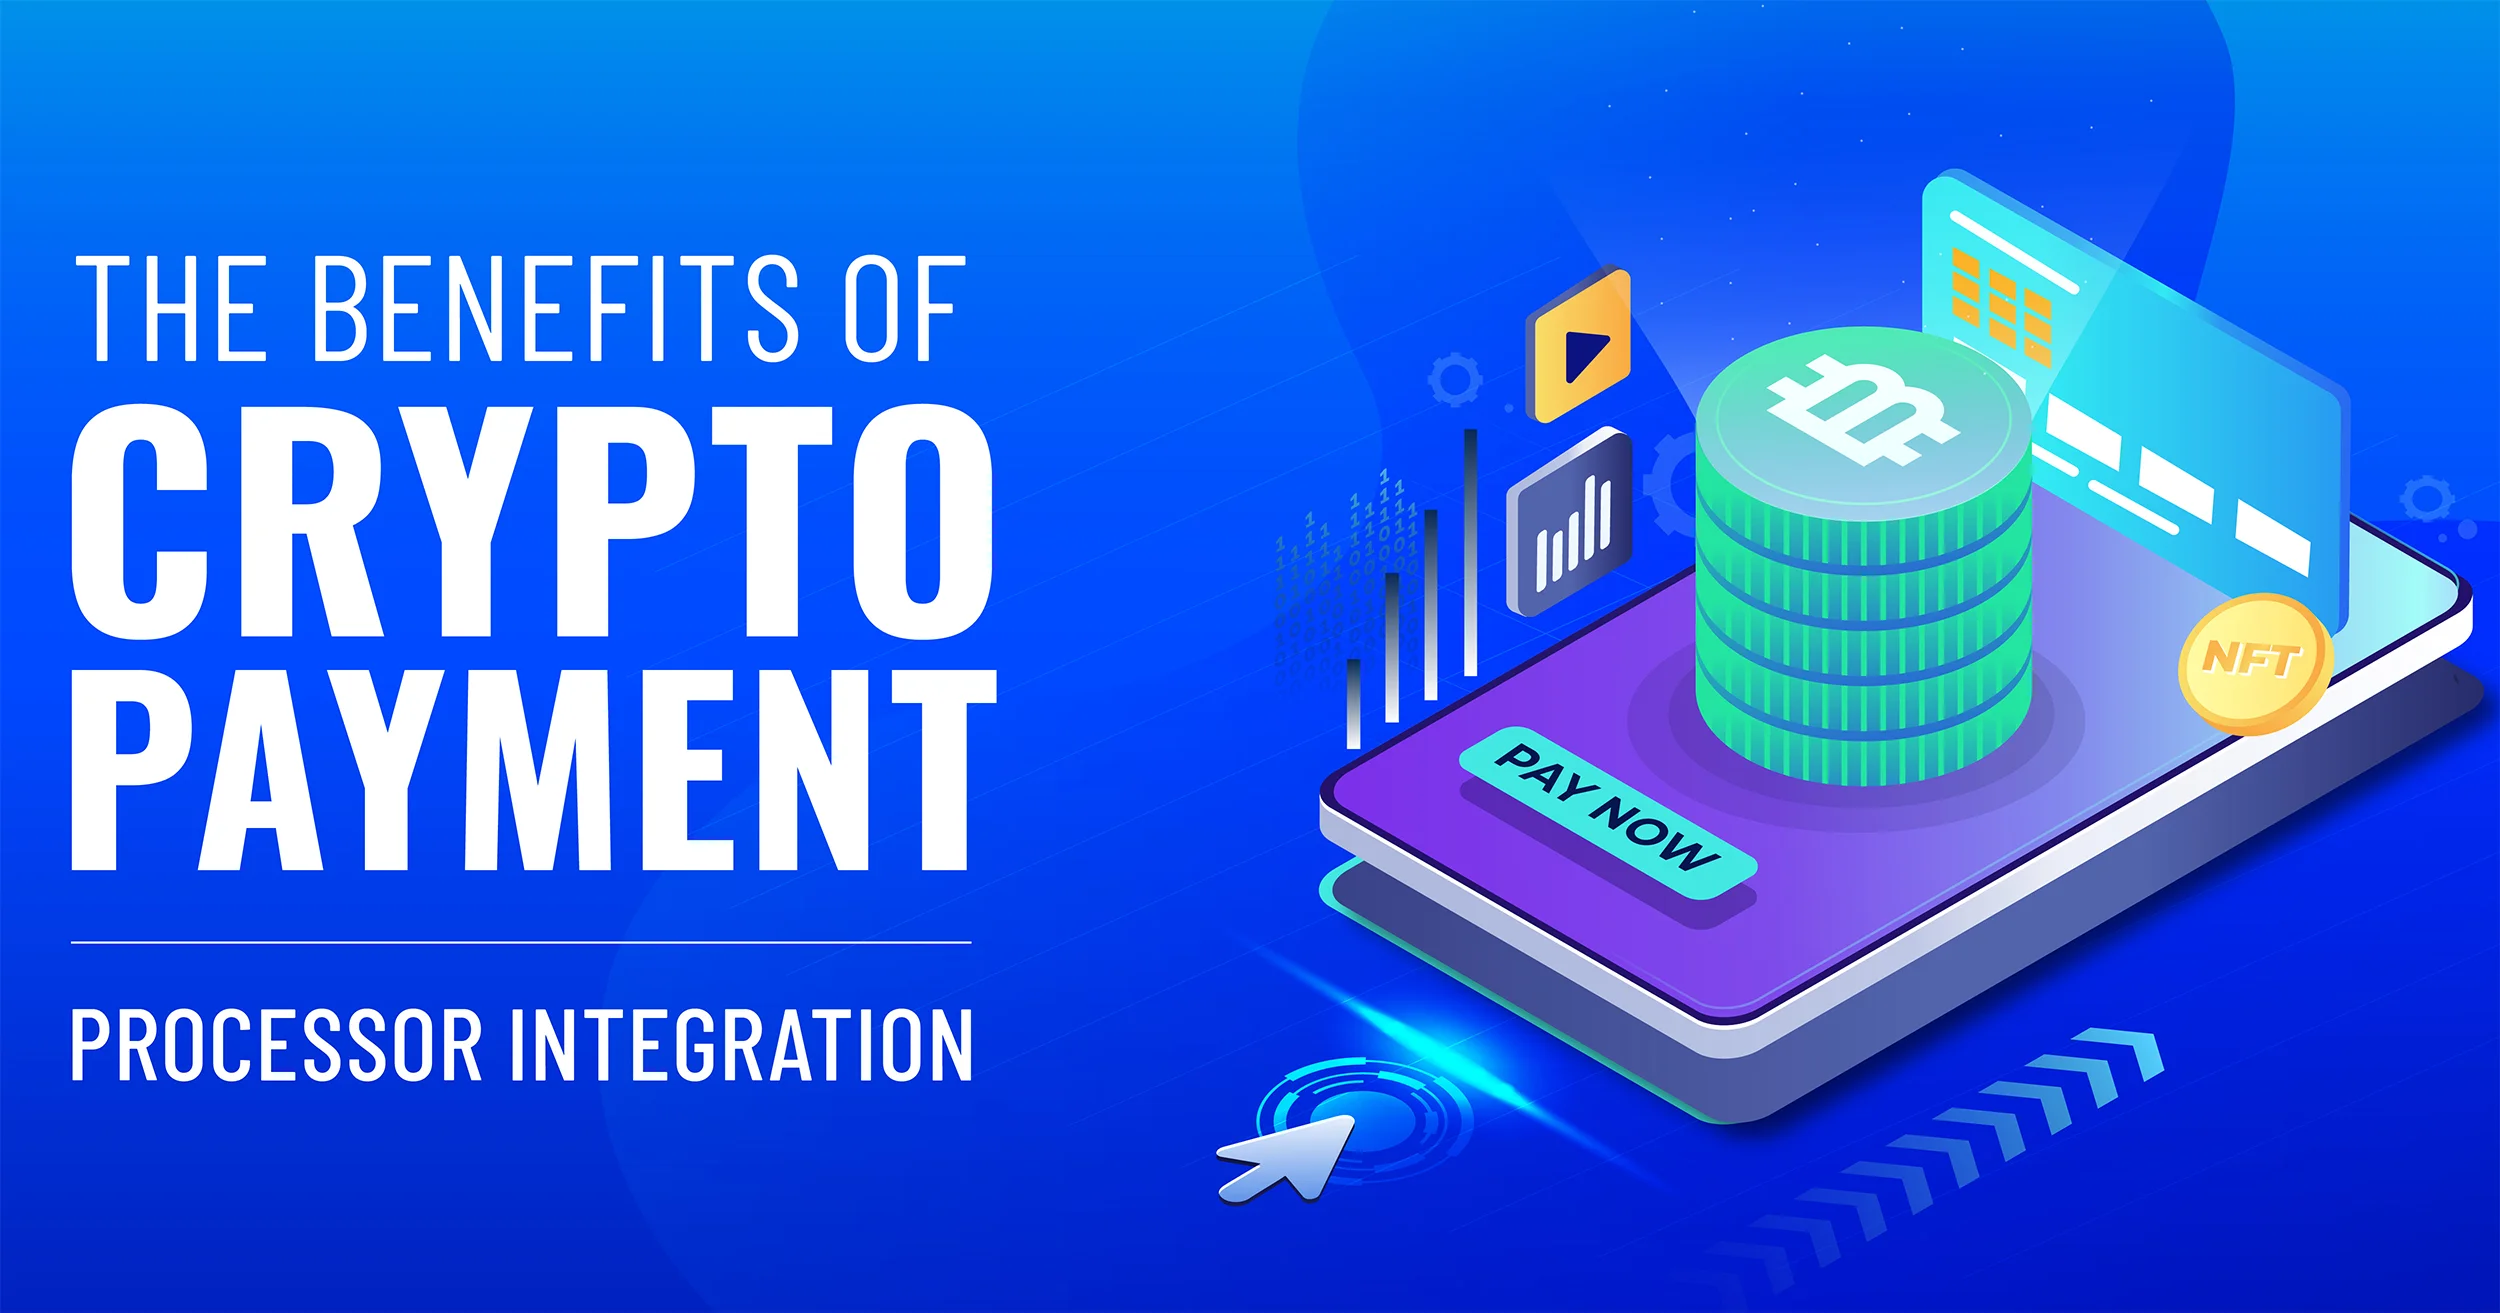  The Benefits of Crypto Payment 